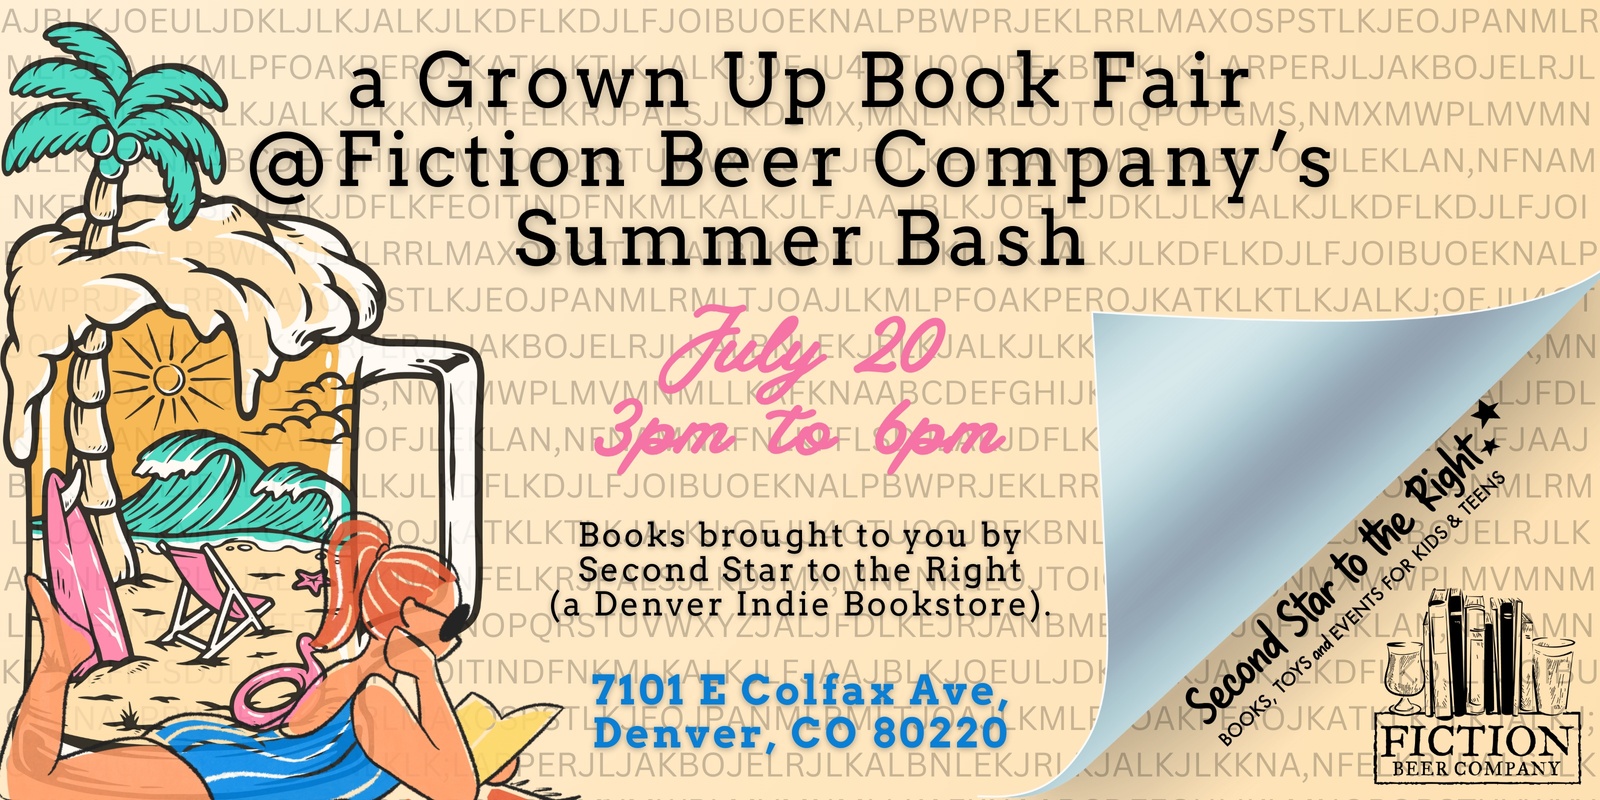 Banner image for Grown-Up Book Fair @ Fiction Beer Company's Summer Bash